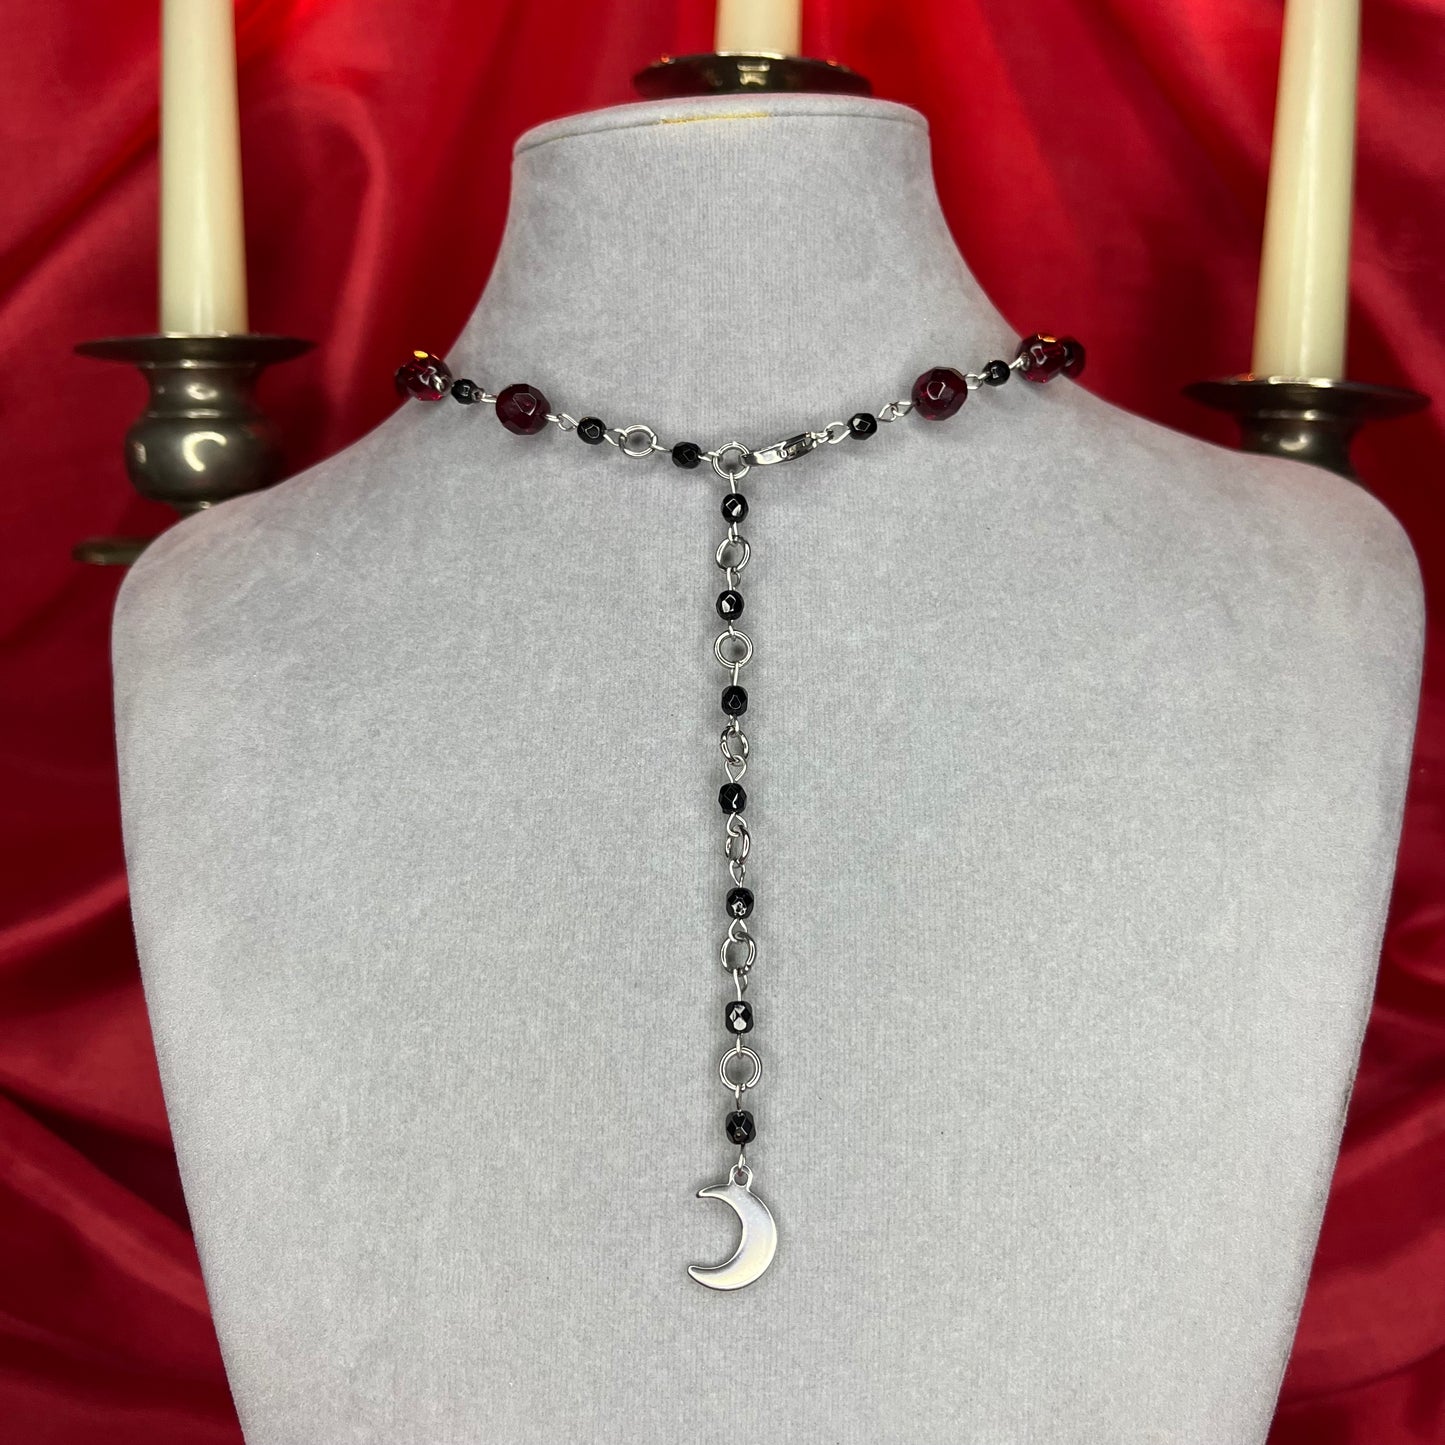 ⋆♱ ‘ Entombed ‘ Mini Rosary Necklace in Red and Black ♱⋆